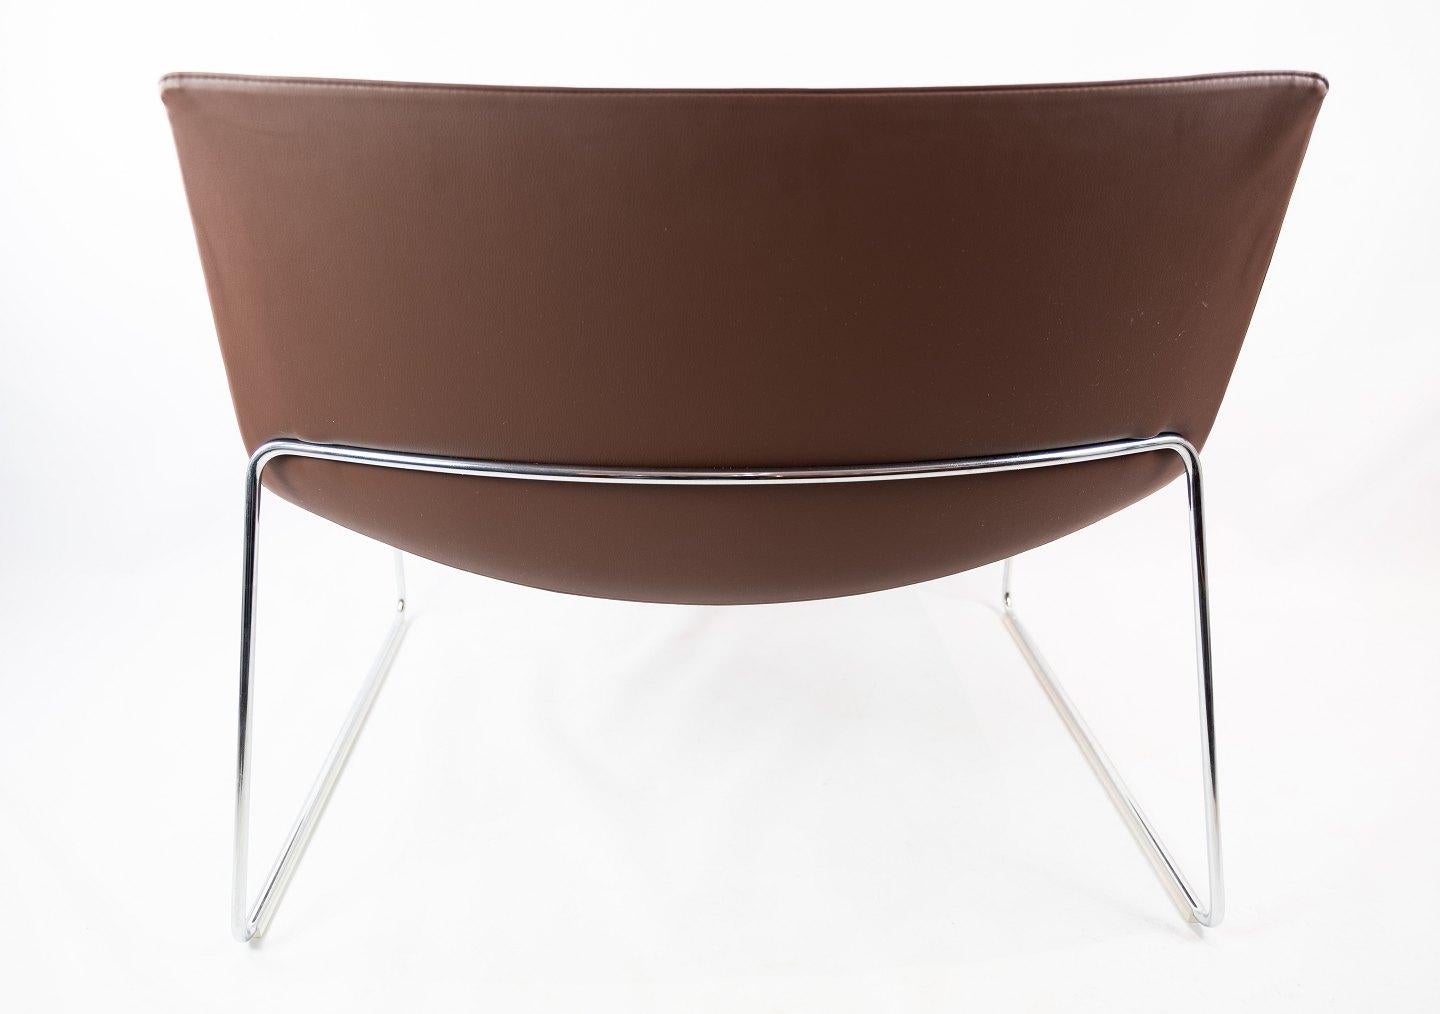 Leather Italian Easy Chair, Model 80, Designed by Lievore Altherr Molina and Arper